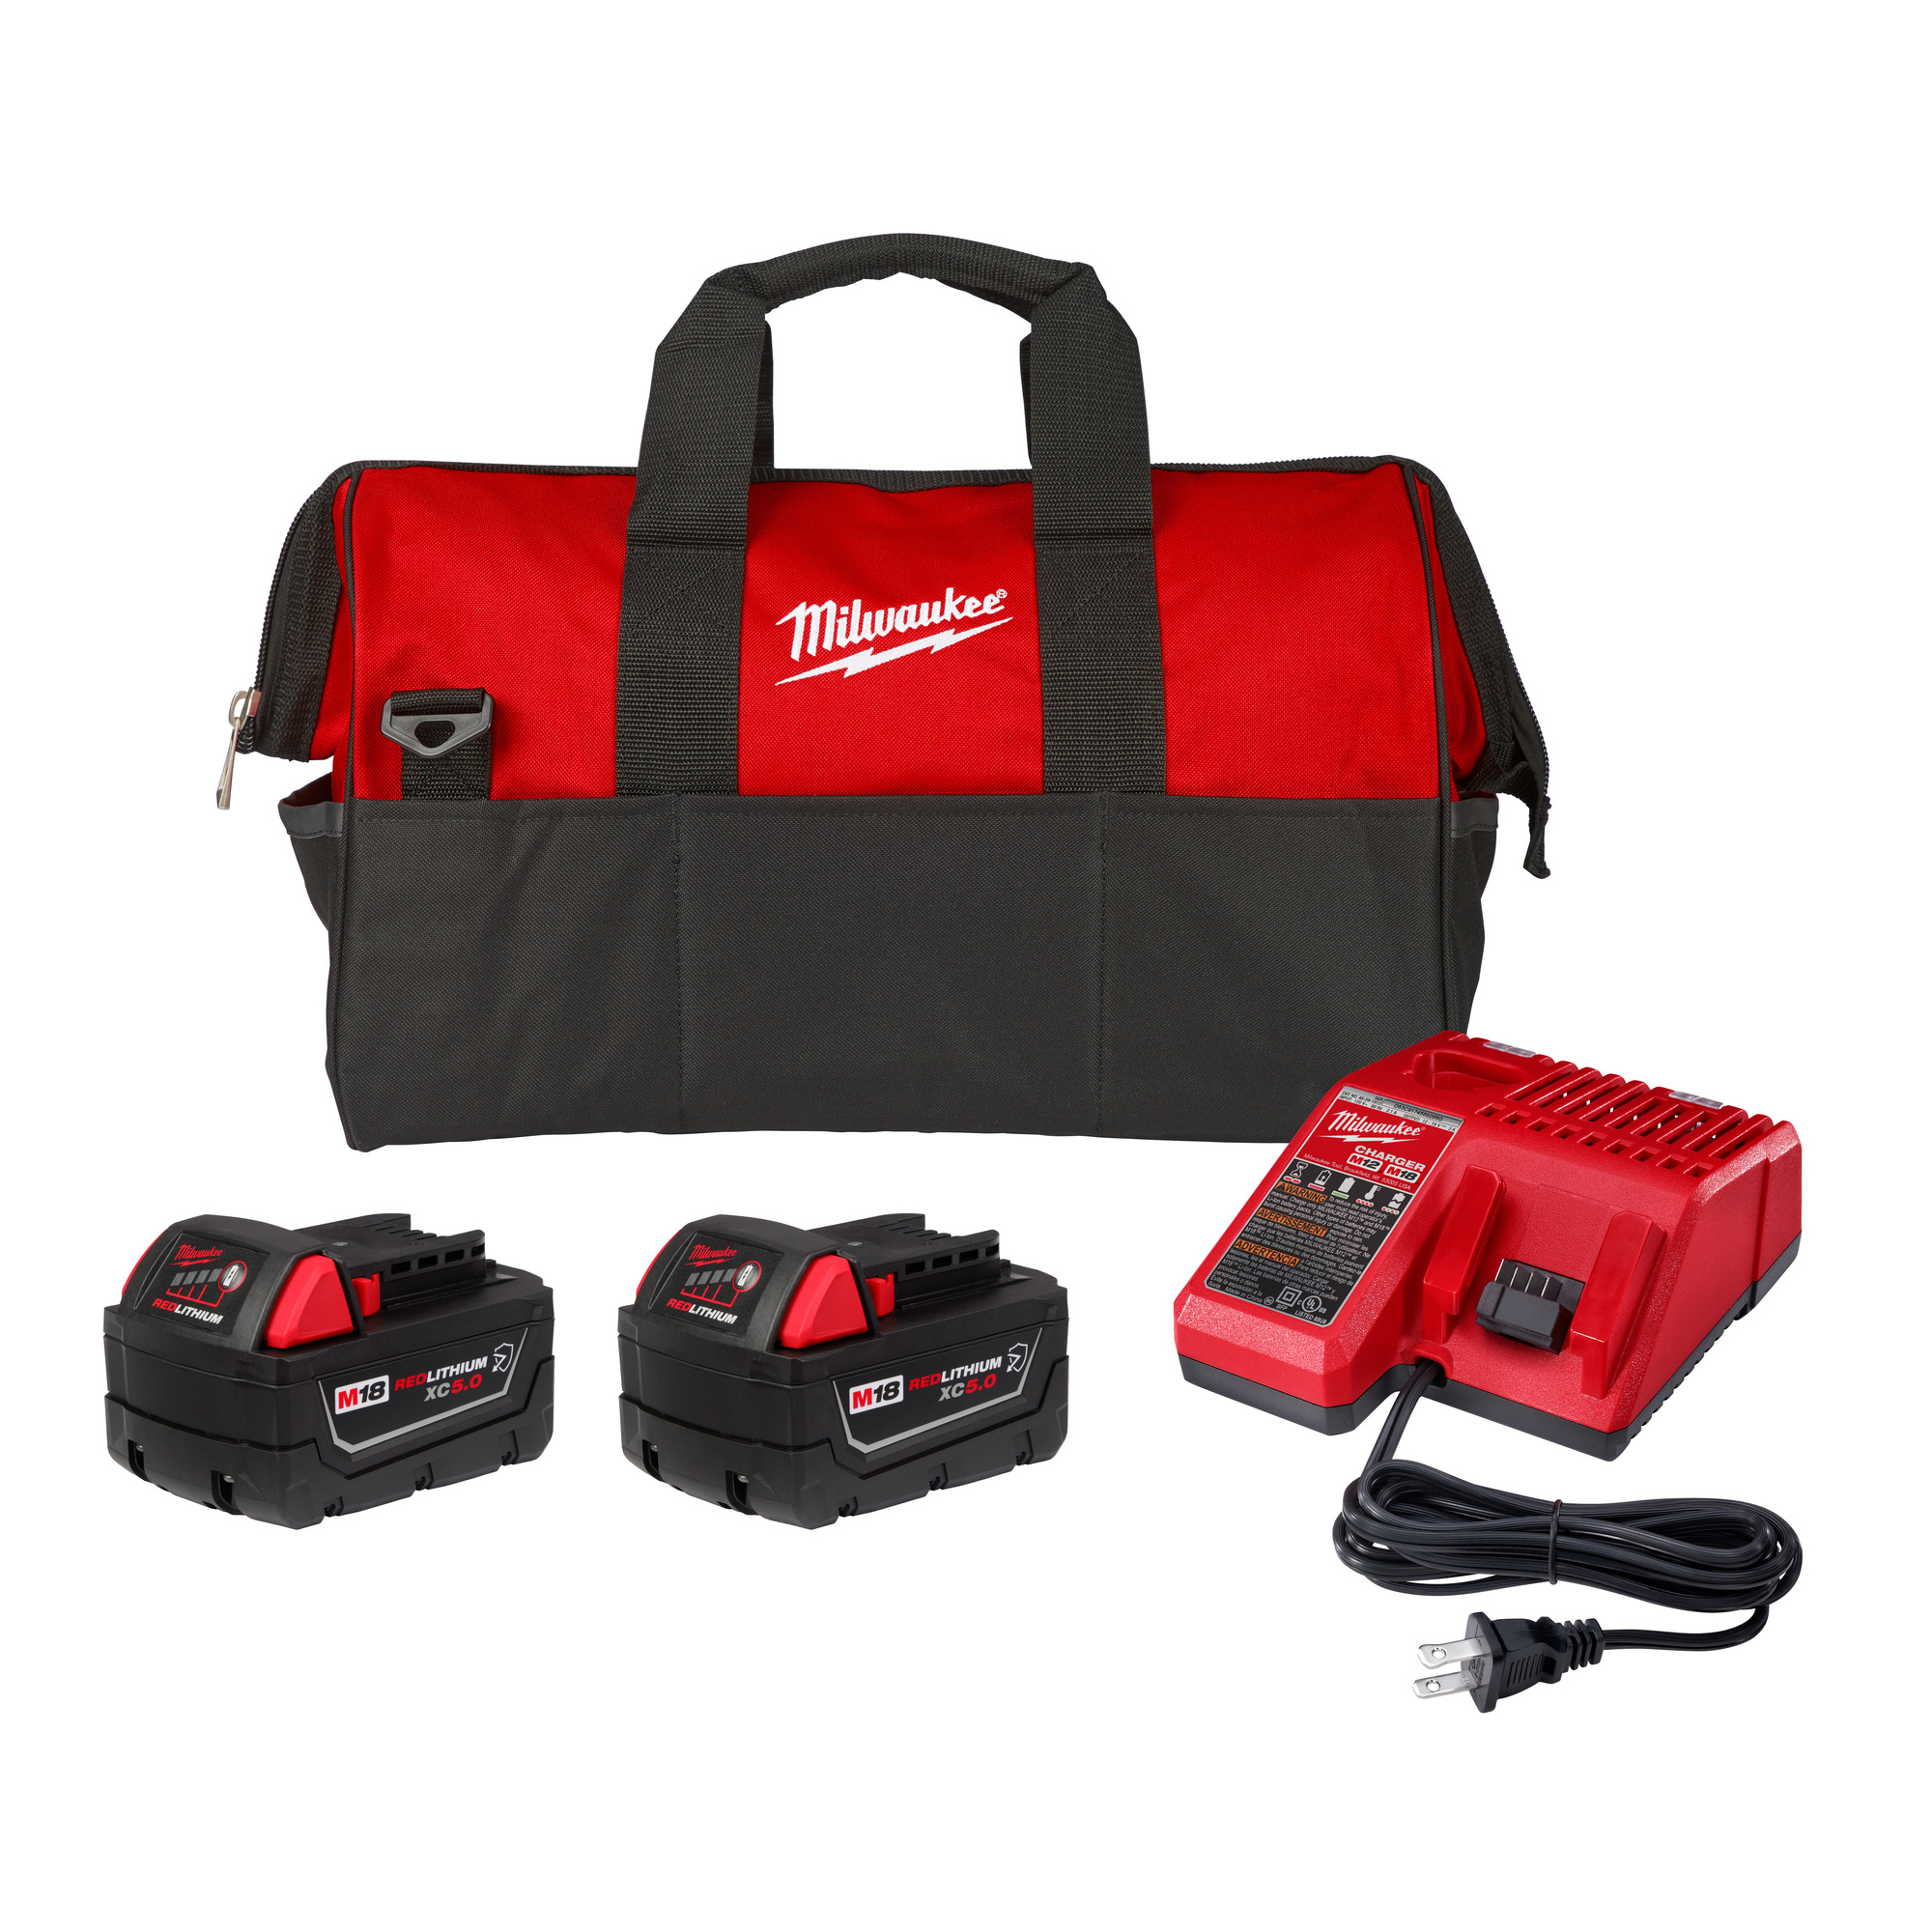 M18 REDLITHIUM XC5.0 RESISTANT BATTERY STARTER KIT, Volts 18, Battery Type Lithium-ion, Batteries (qty.) 2, Model - Milwaukee 48-59-1852R